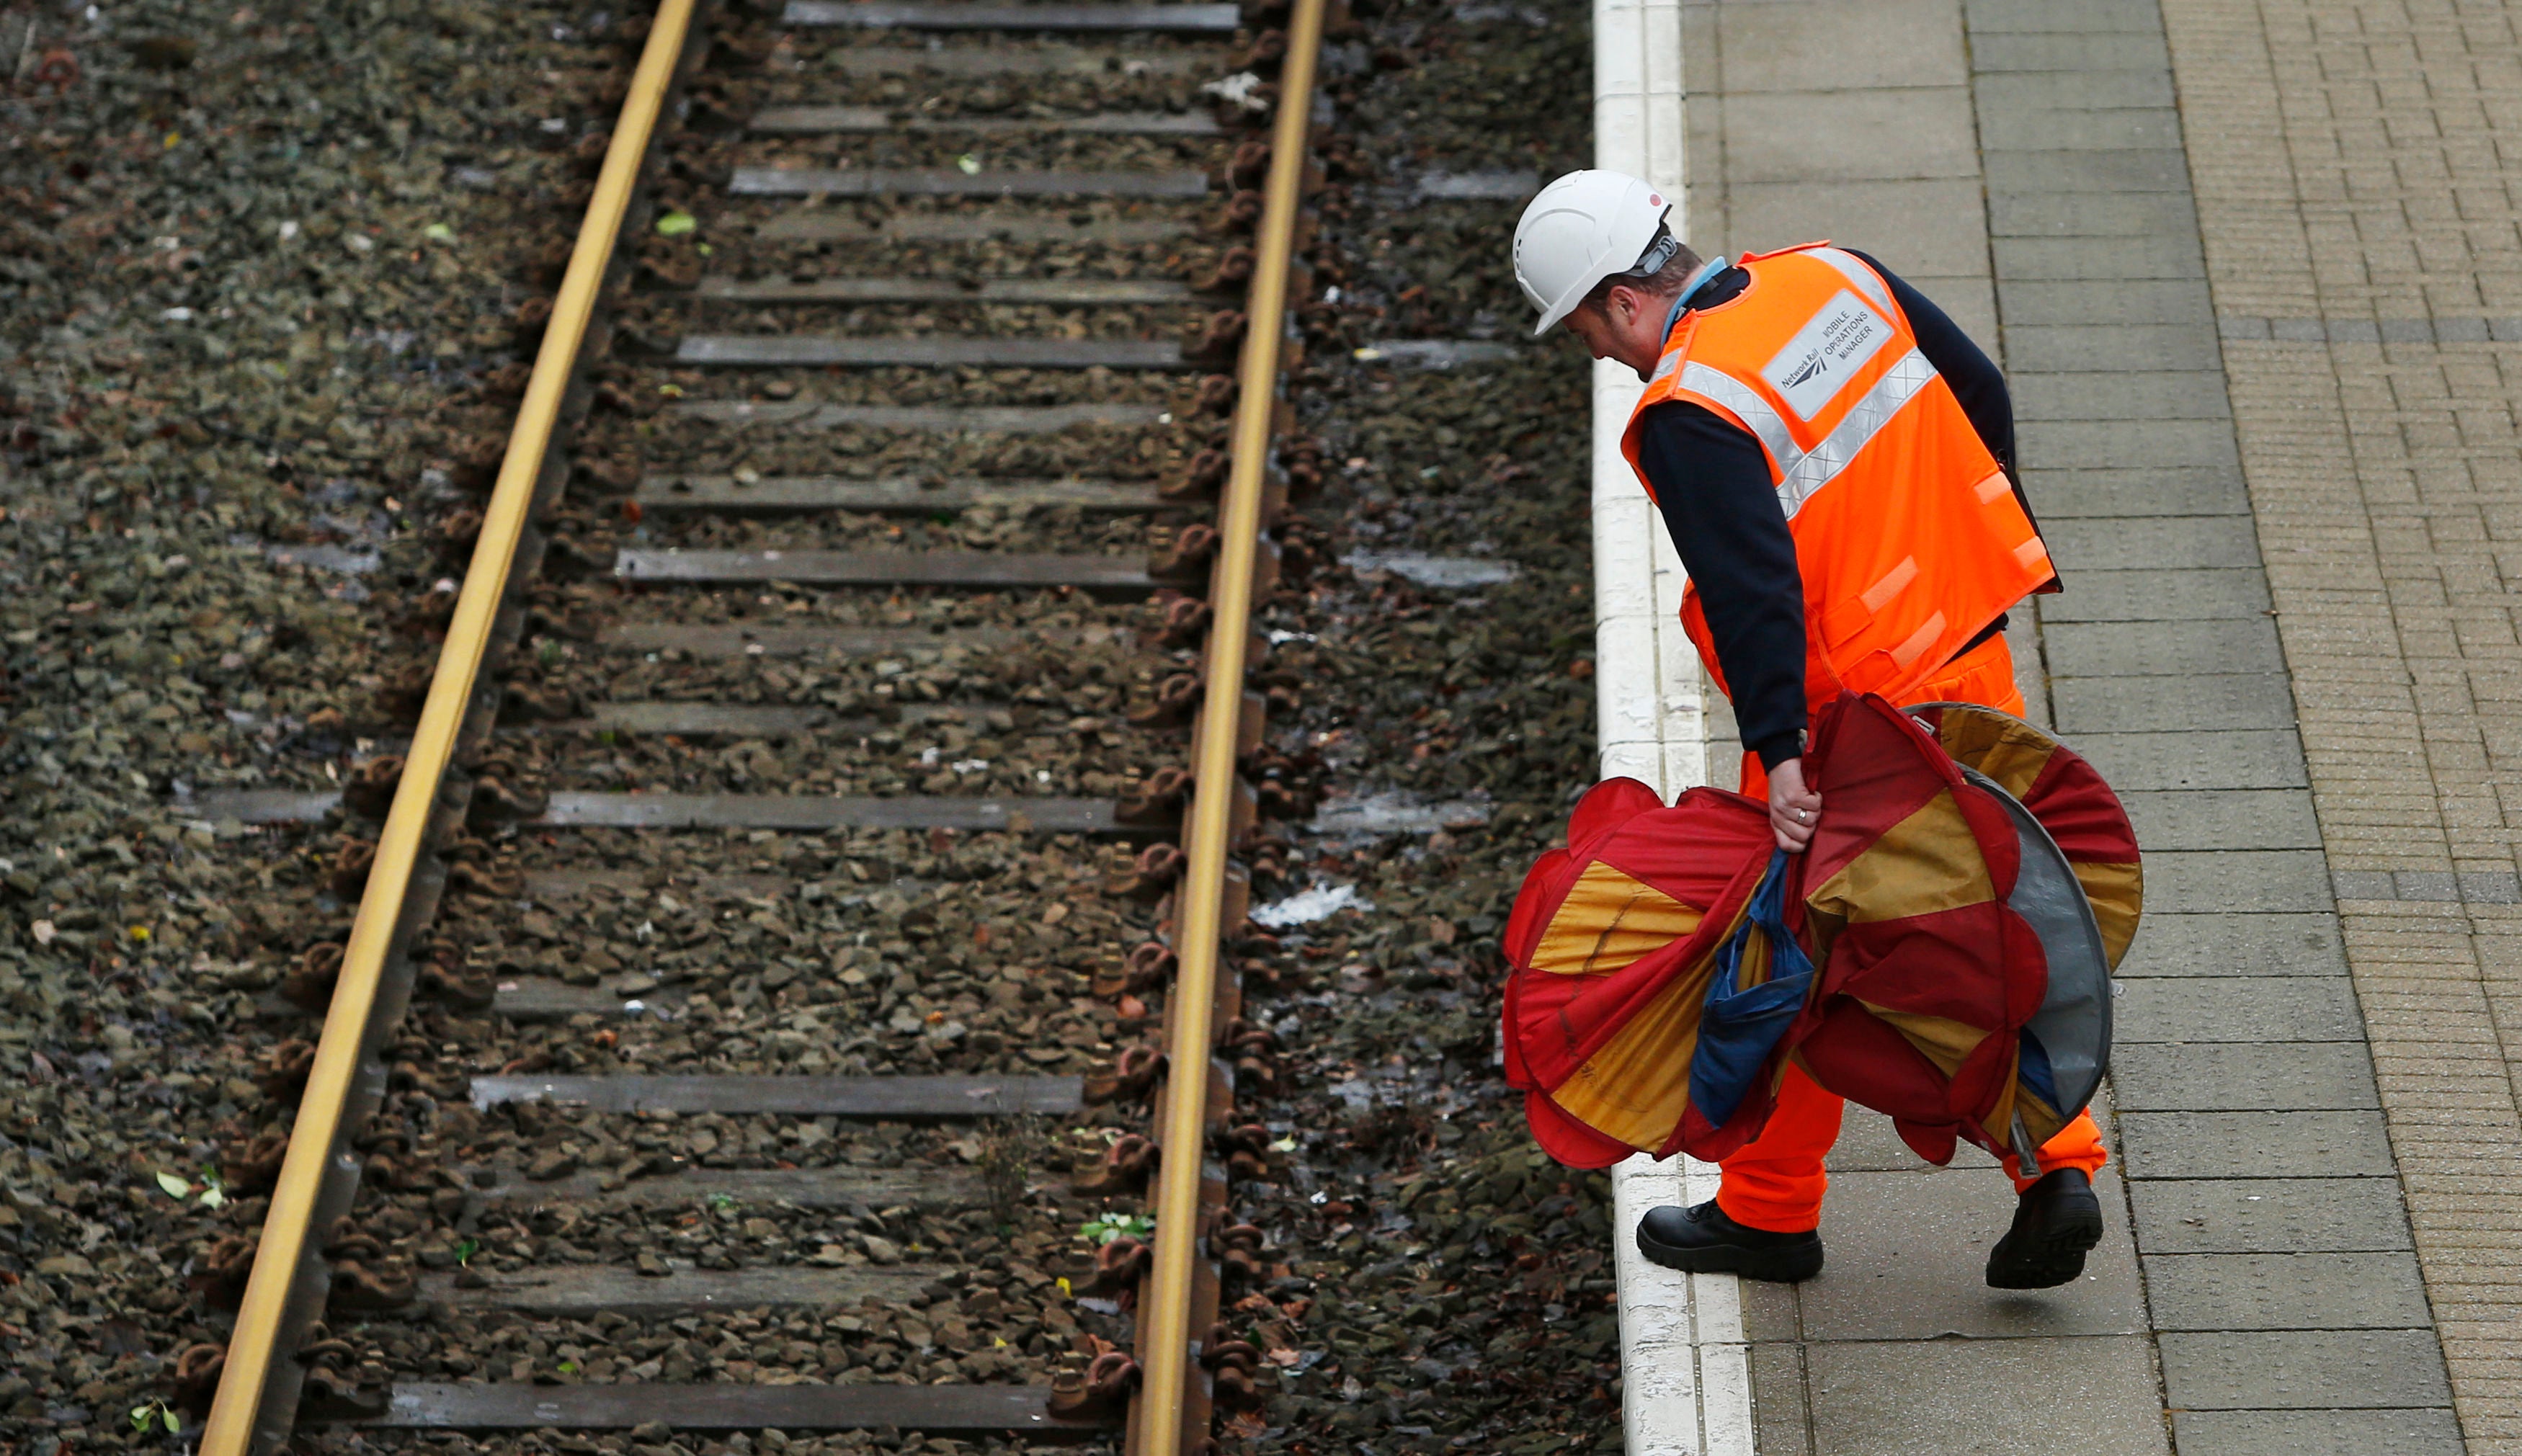 Railway lines will need to be checked for obstructions following Storm Eustice (Danny Lawson/PA)